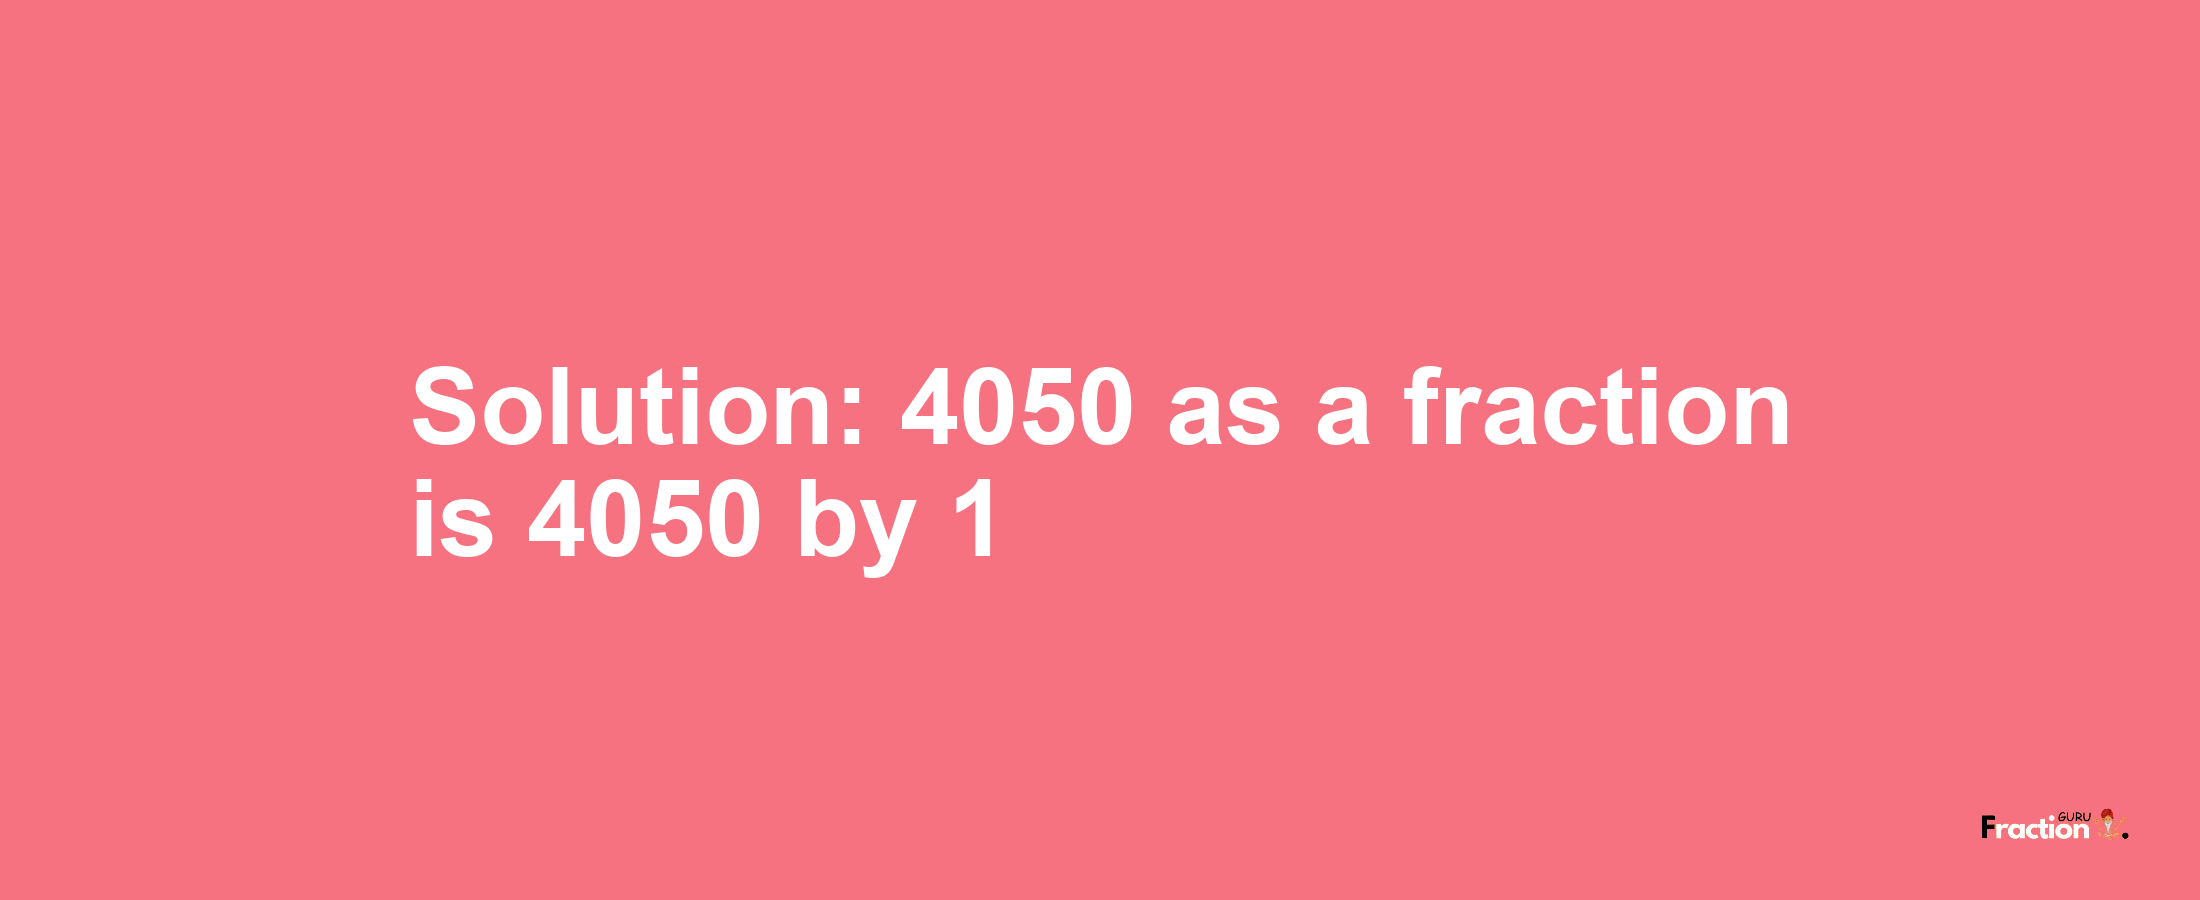 Solution:4050 as a fraction is 4050/1